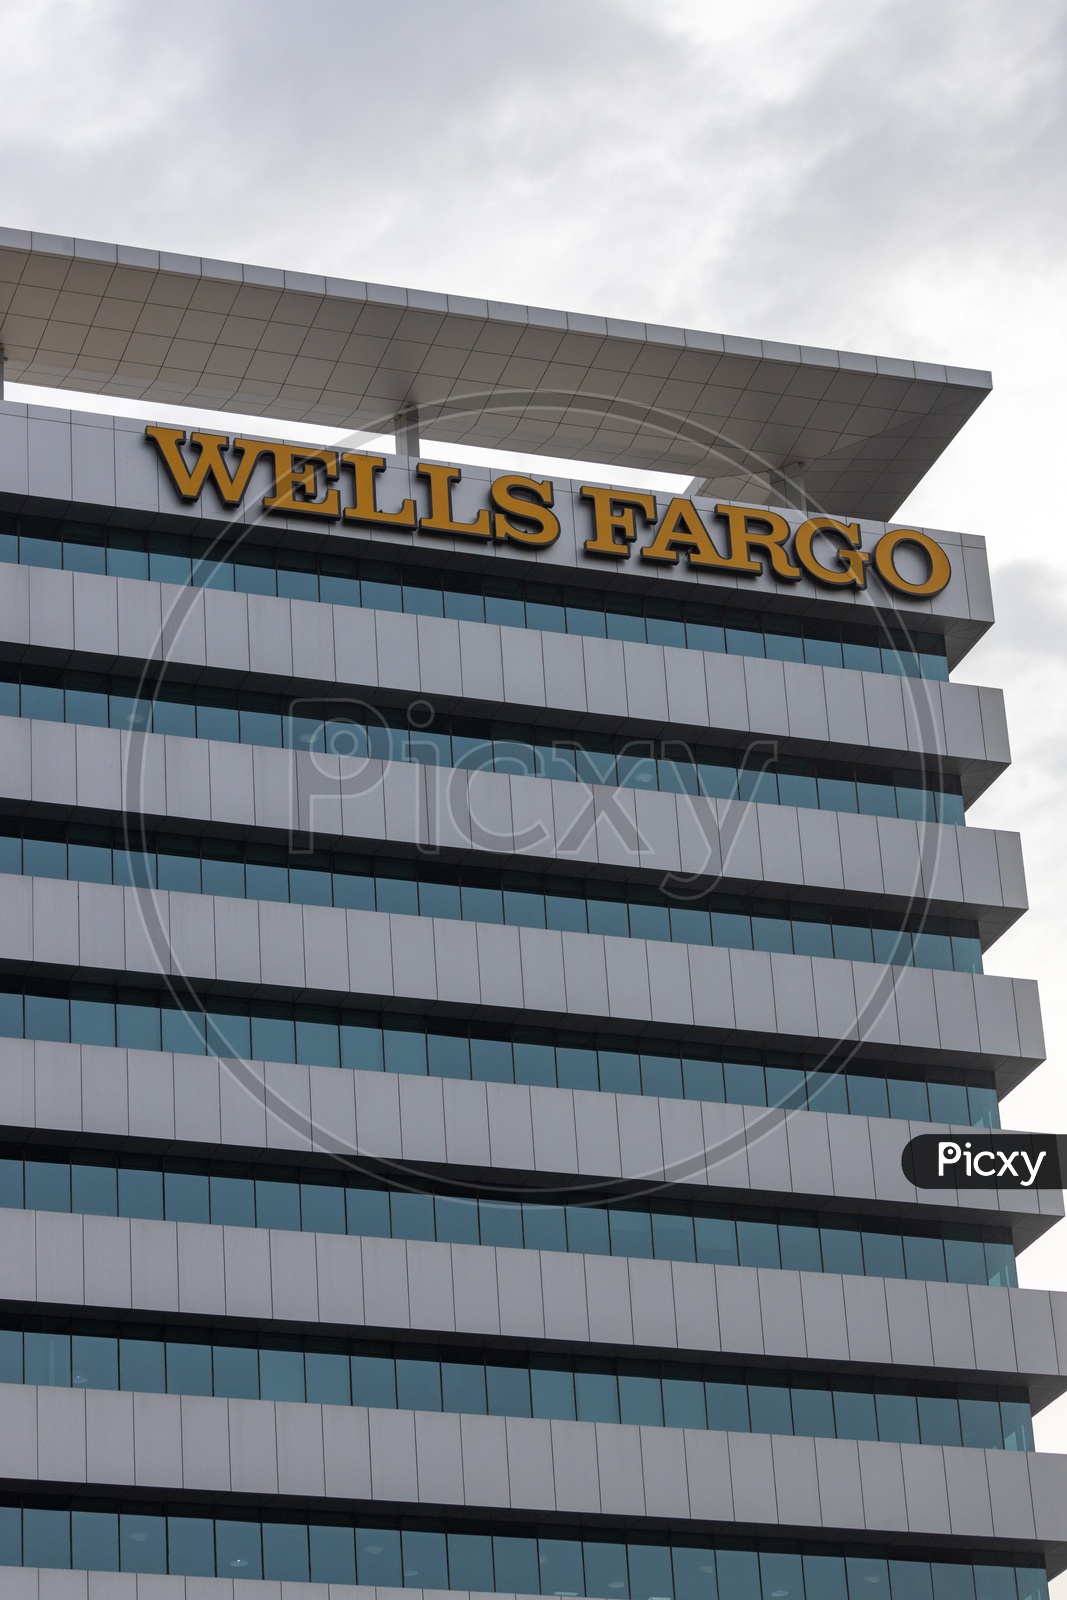 Wells Fargo  Corporate Company Name On Office Building Facade